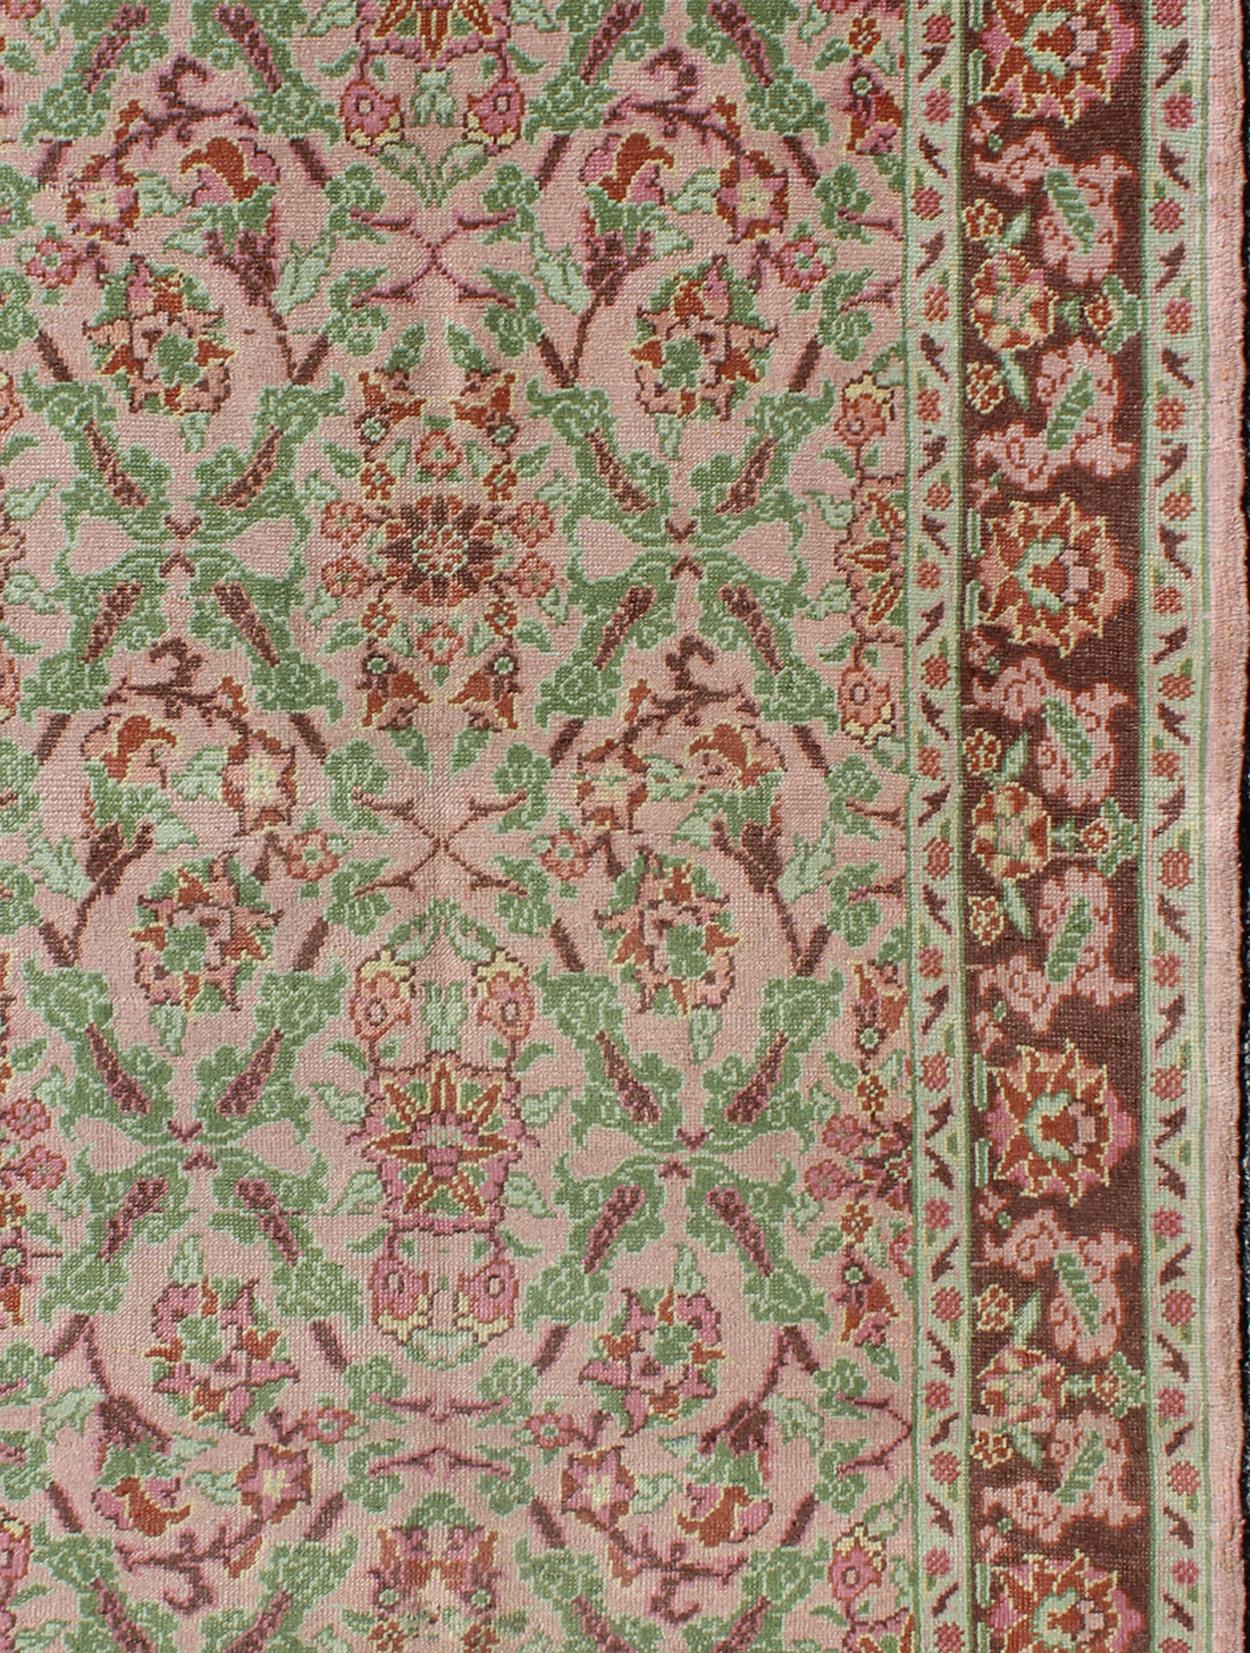 Measures: 4'1 x 6'7

Set on a light pink field with an all-over pattern, this beautiful midcentury Turkish Oushak rug (circa 1940) features cross-latch and lattice work with repeating blossom and flower motifs in their centers with light green